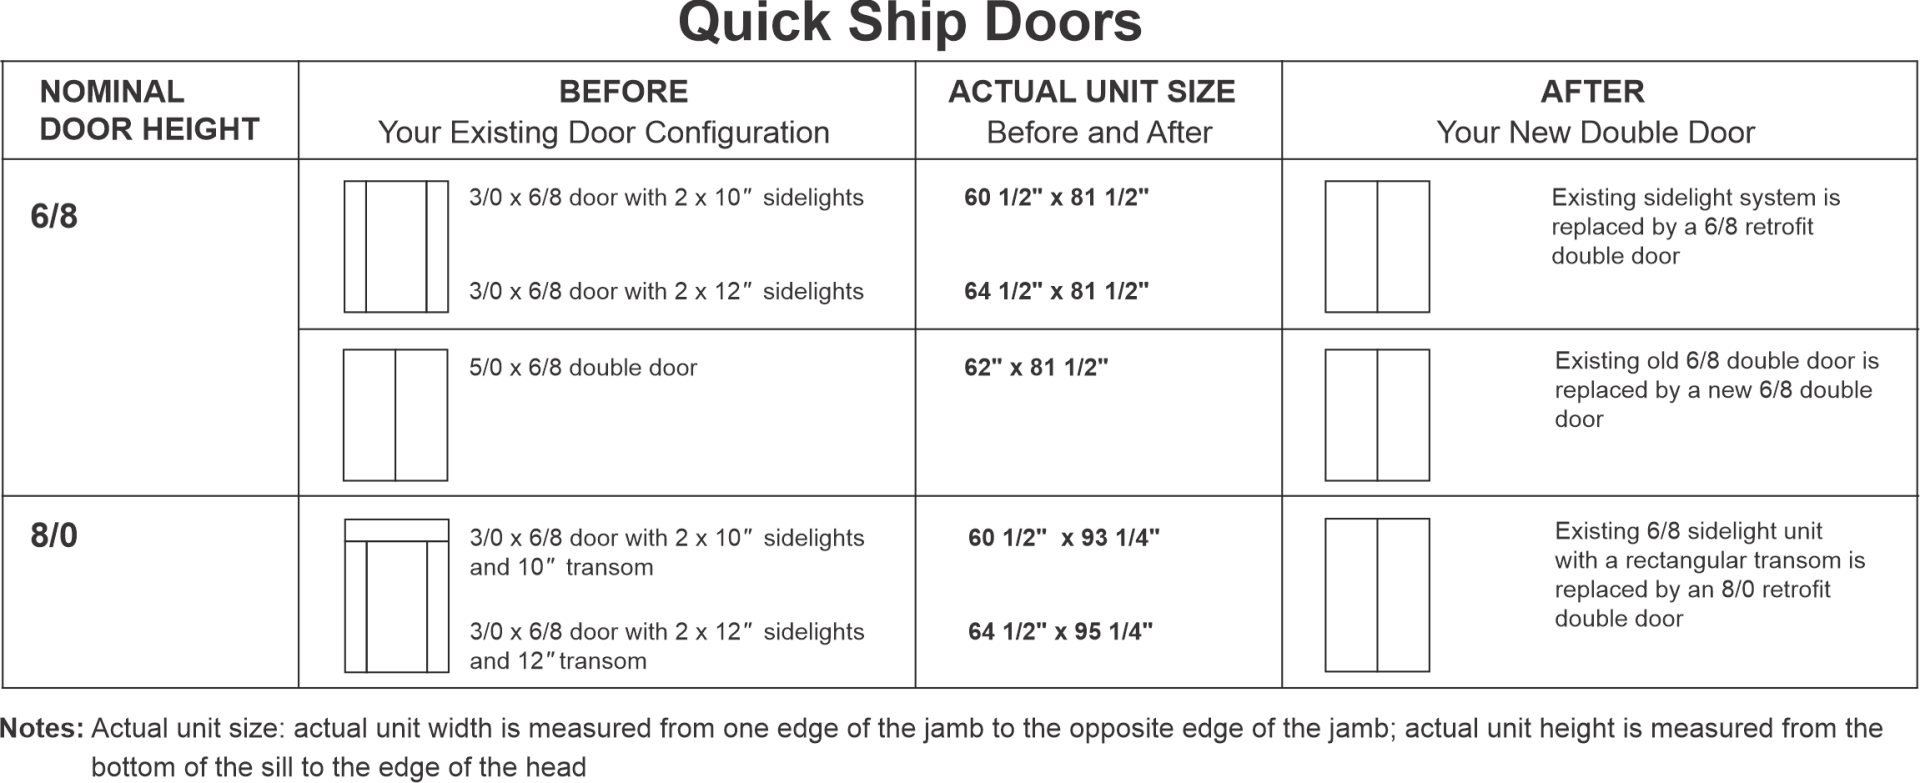 a black and white drawing of quick ship doors